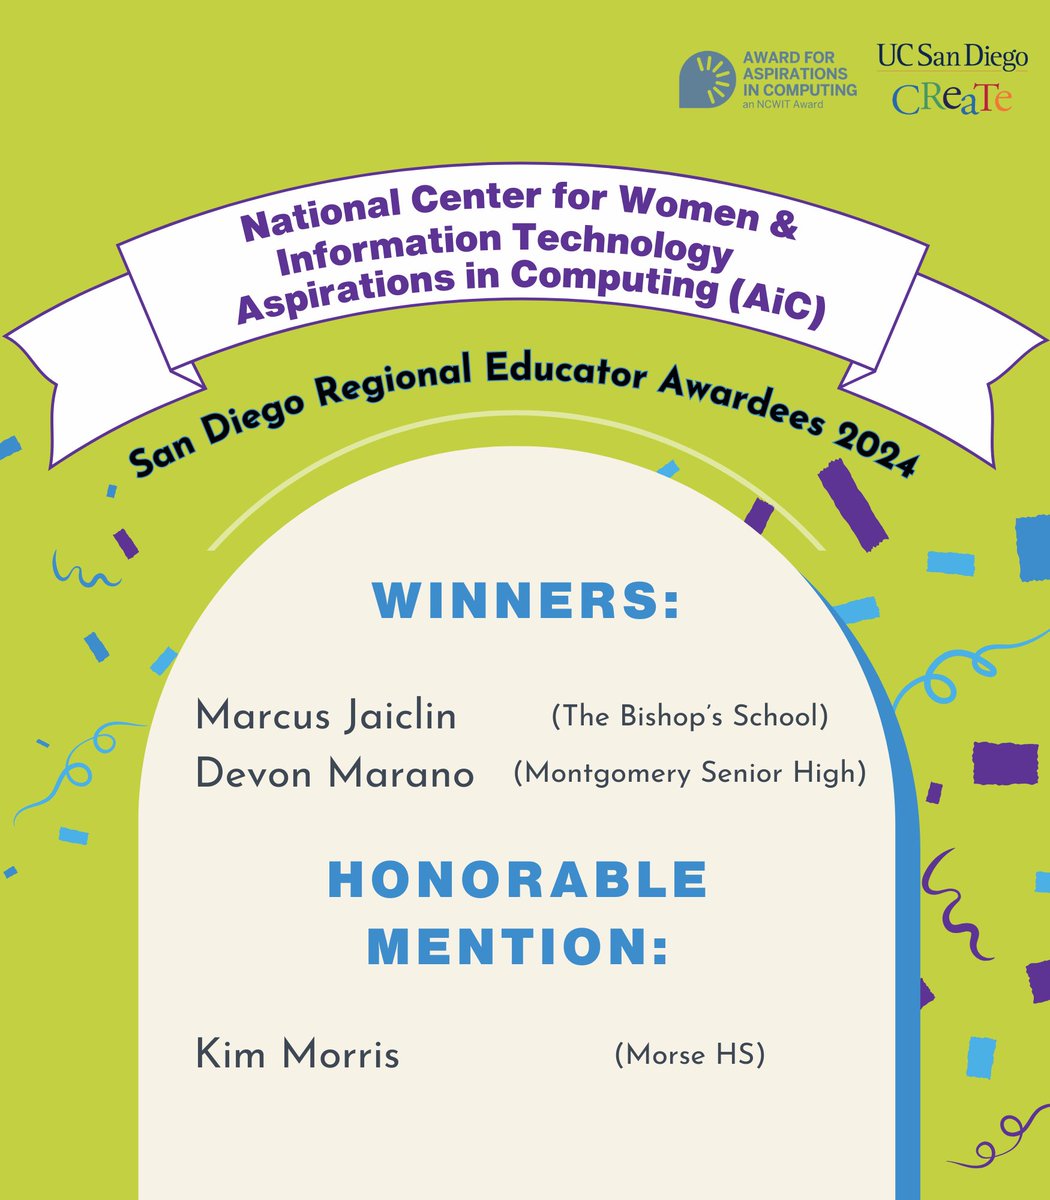 Congratulations! As the NCWIT AiC San Diego Affiliate, CREATE at UC San Diego is proud to honor your dedication to computer science and your outstanding achievements in CS and tech clubs. Your passion for empowering girls in tech is inspiring. #NCWITAiC #WomenInTech #CSforAll